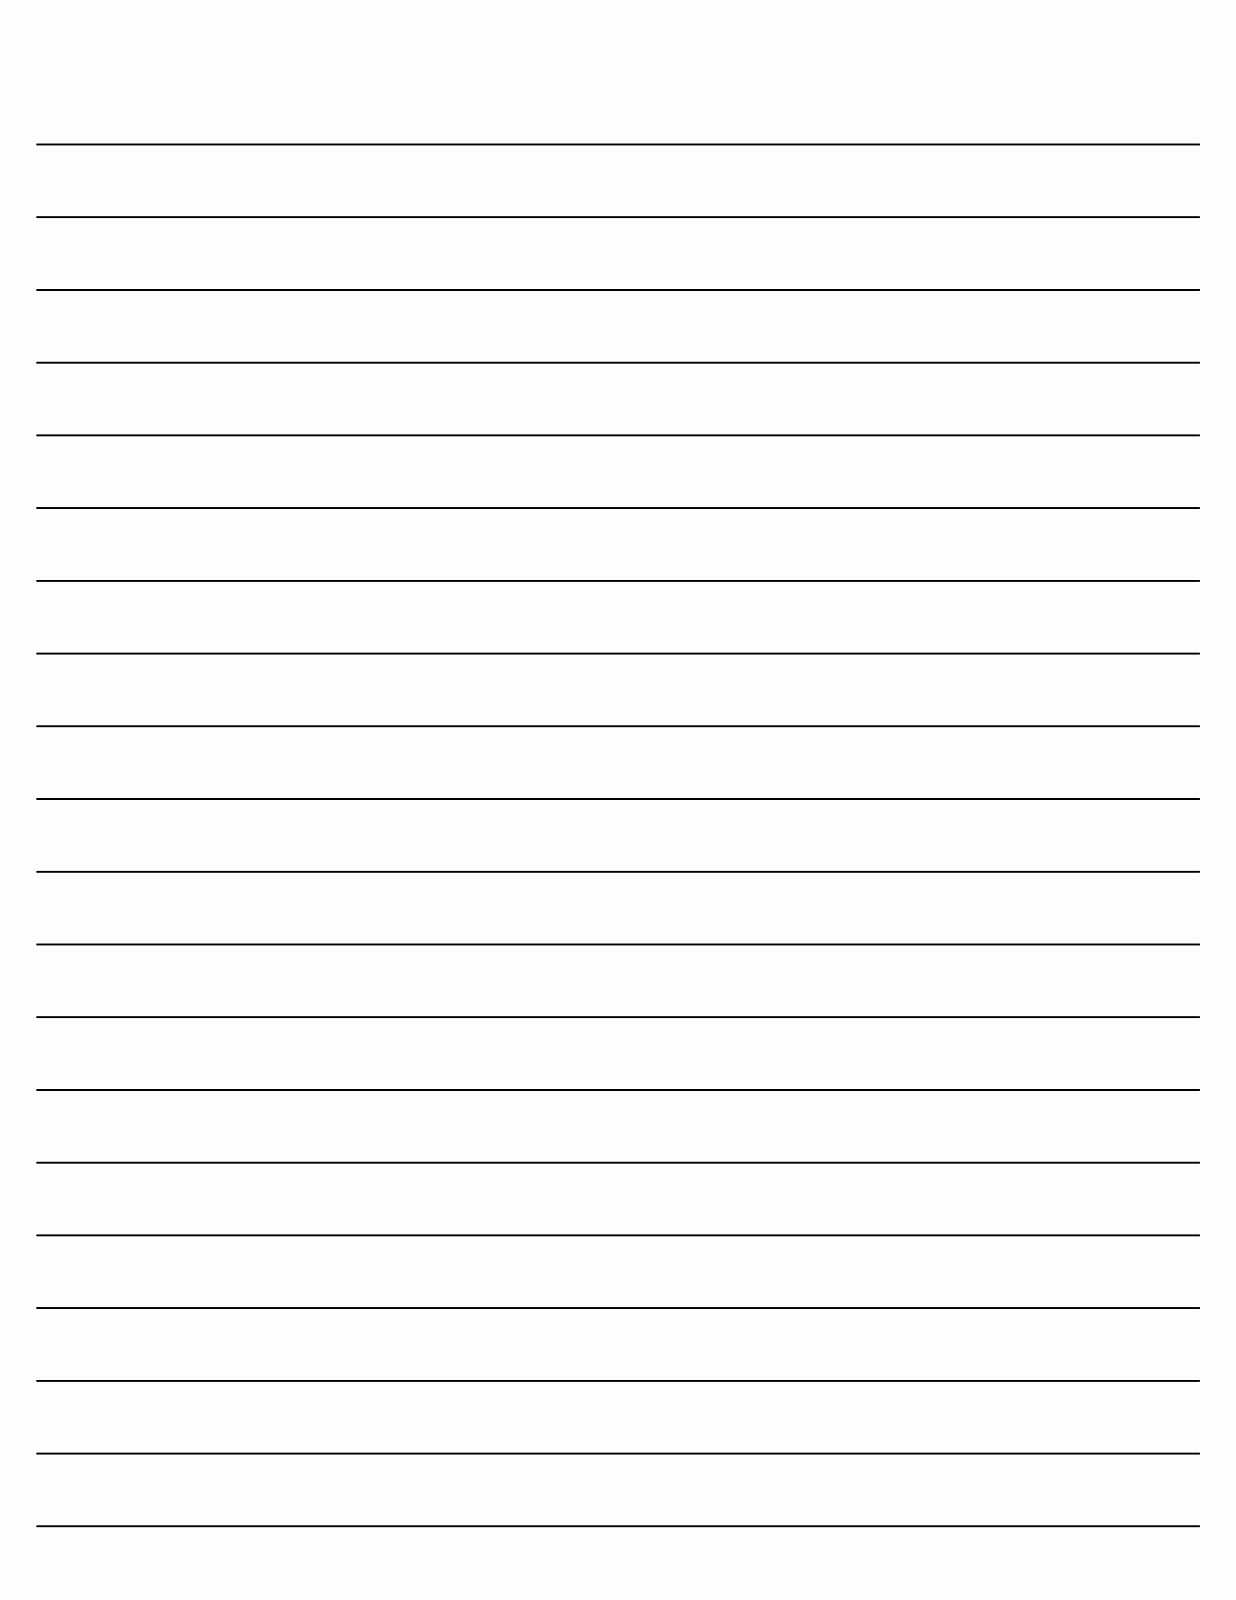 Microsoft Word Lined Paper Template New Picture Writing Paper Notebook Paper – It Avenue